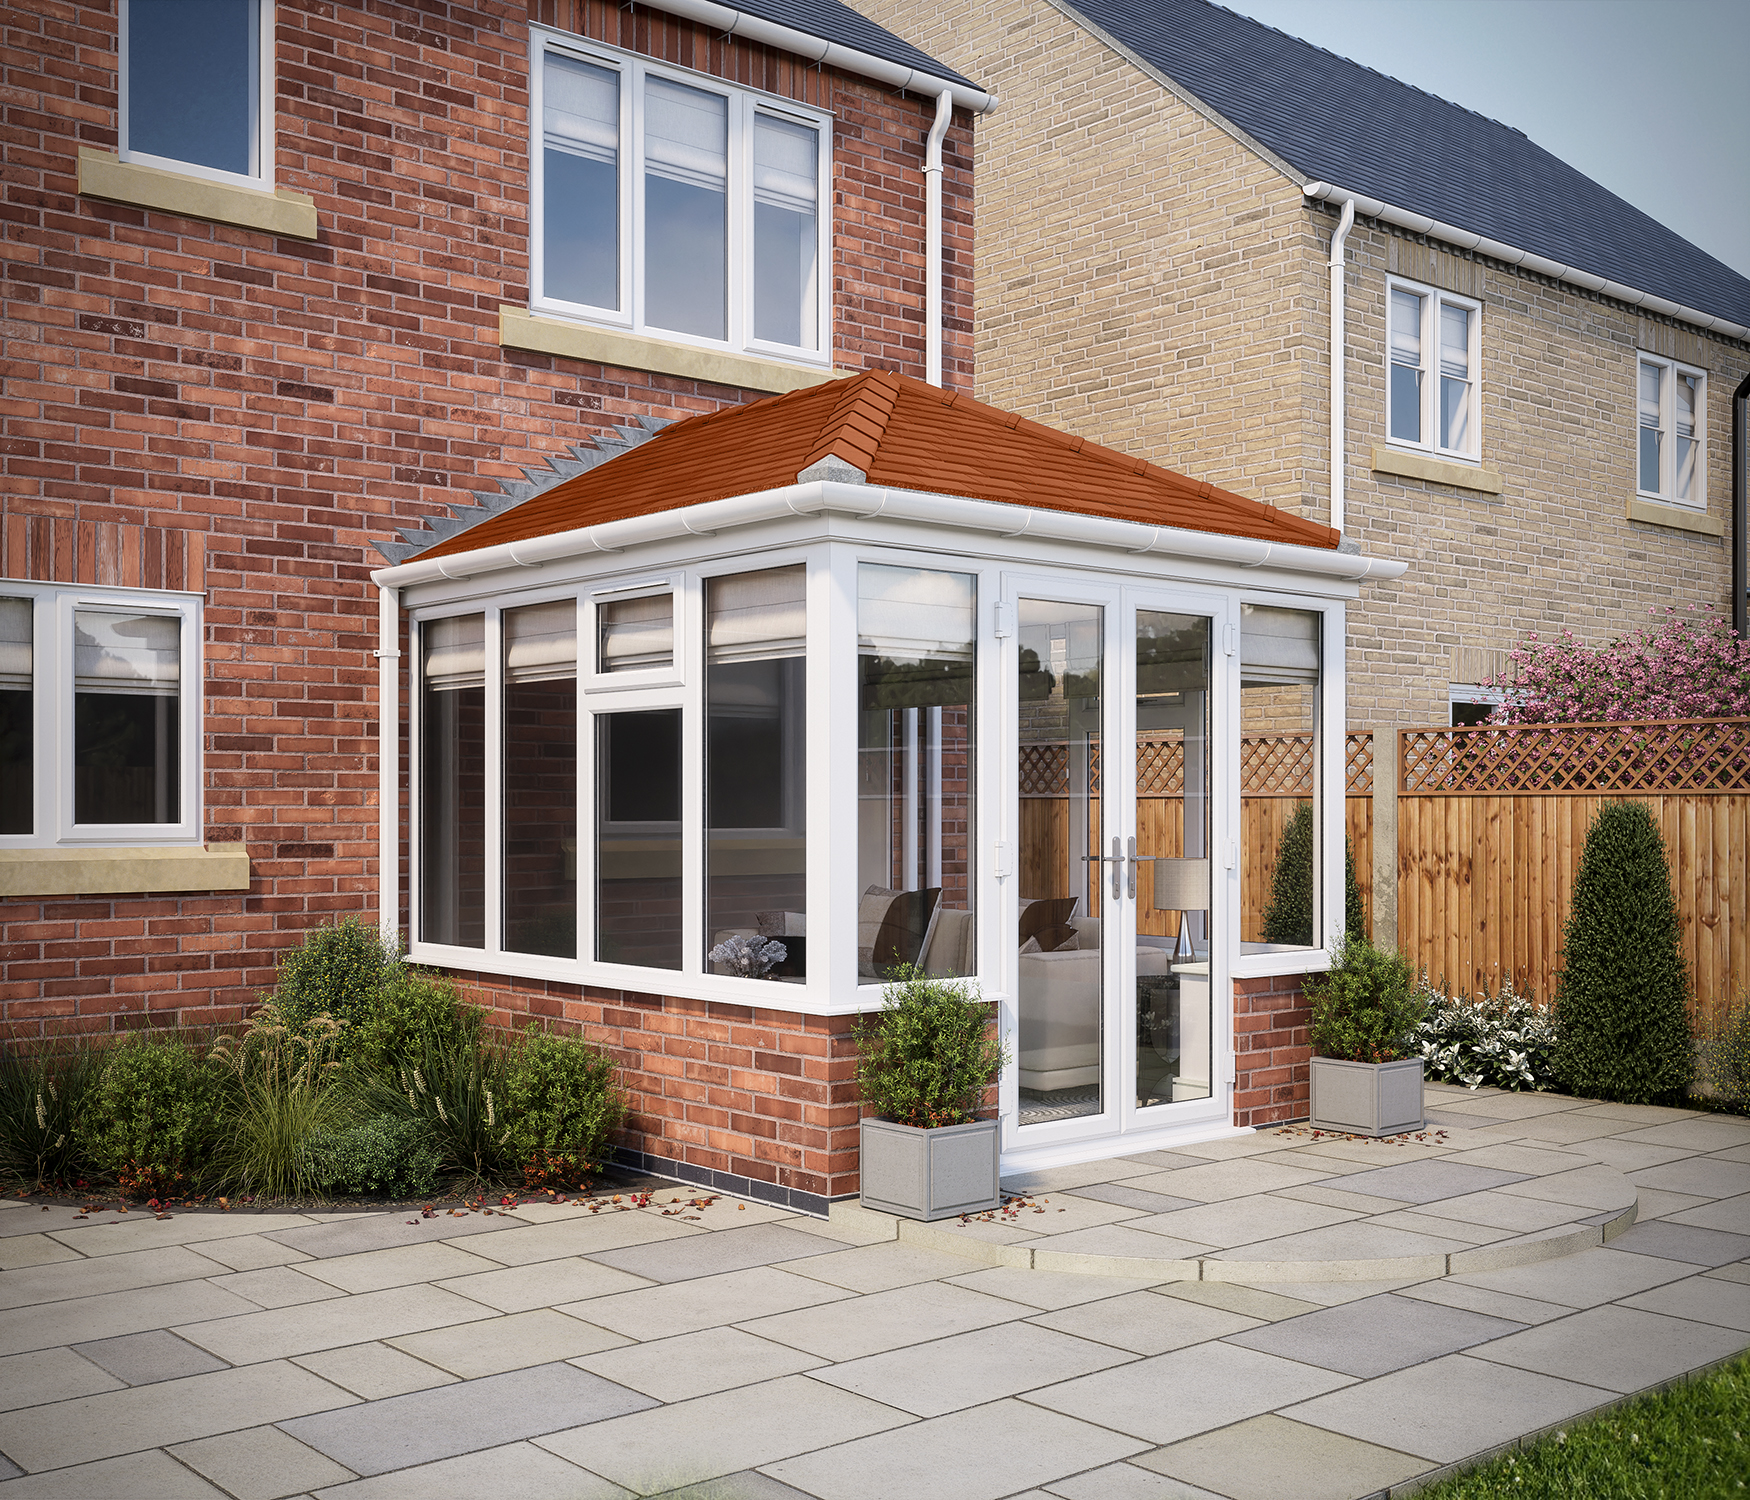 SOLid roof Edwardian Conservatory White Frames Dwarf Wall with Rustic Terracotta Tiles